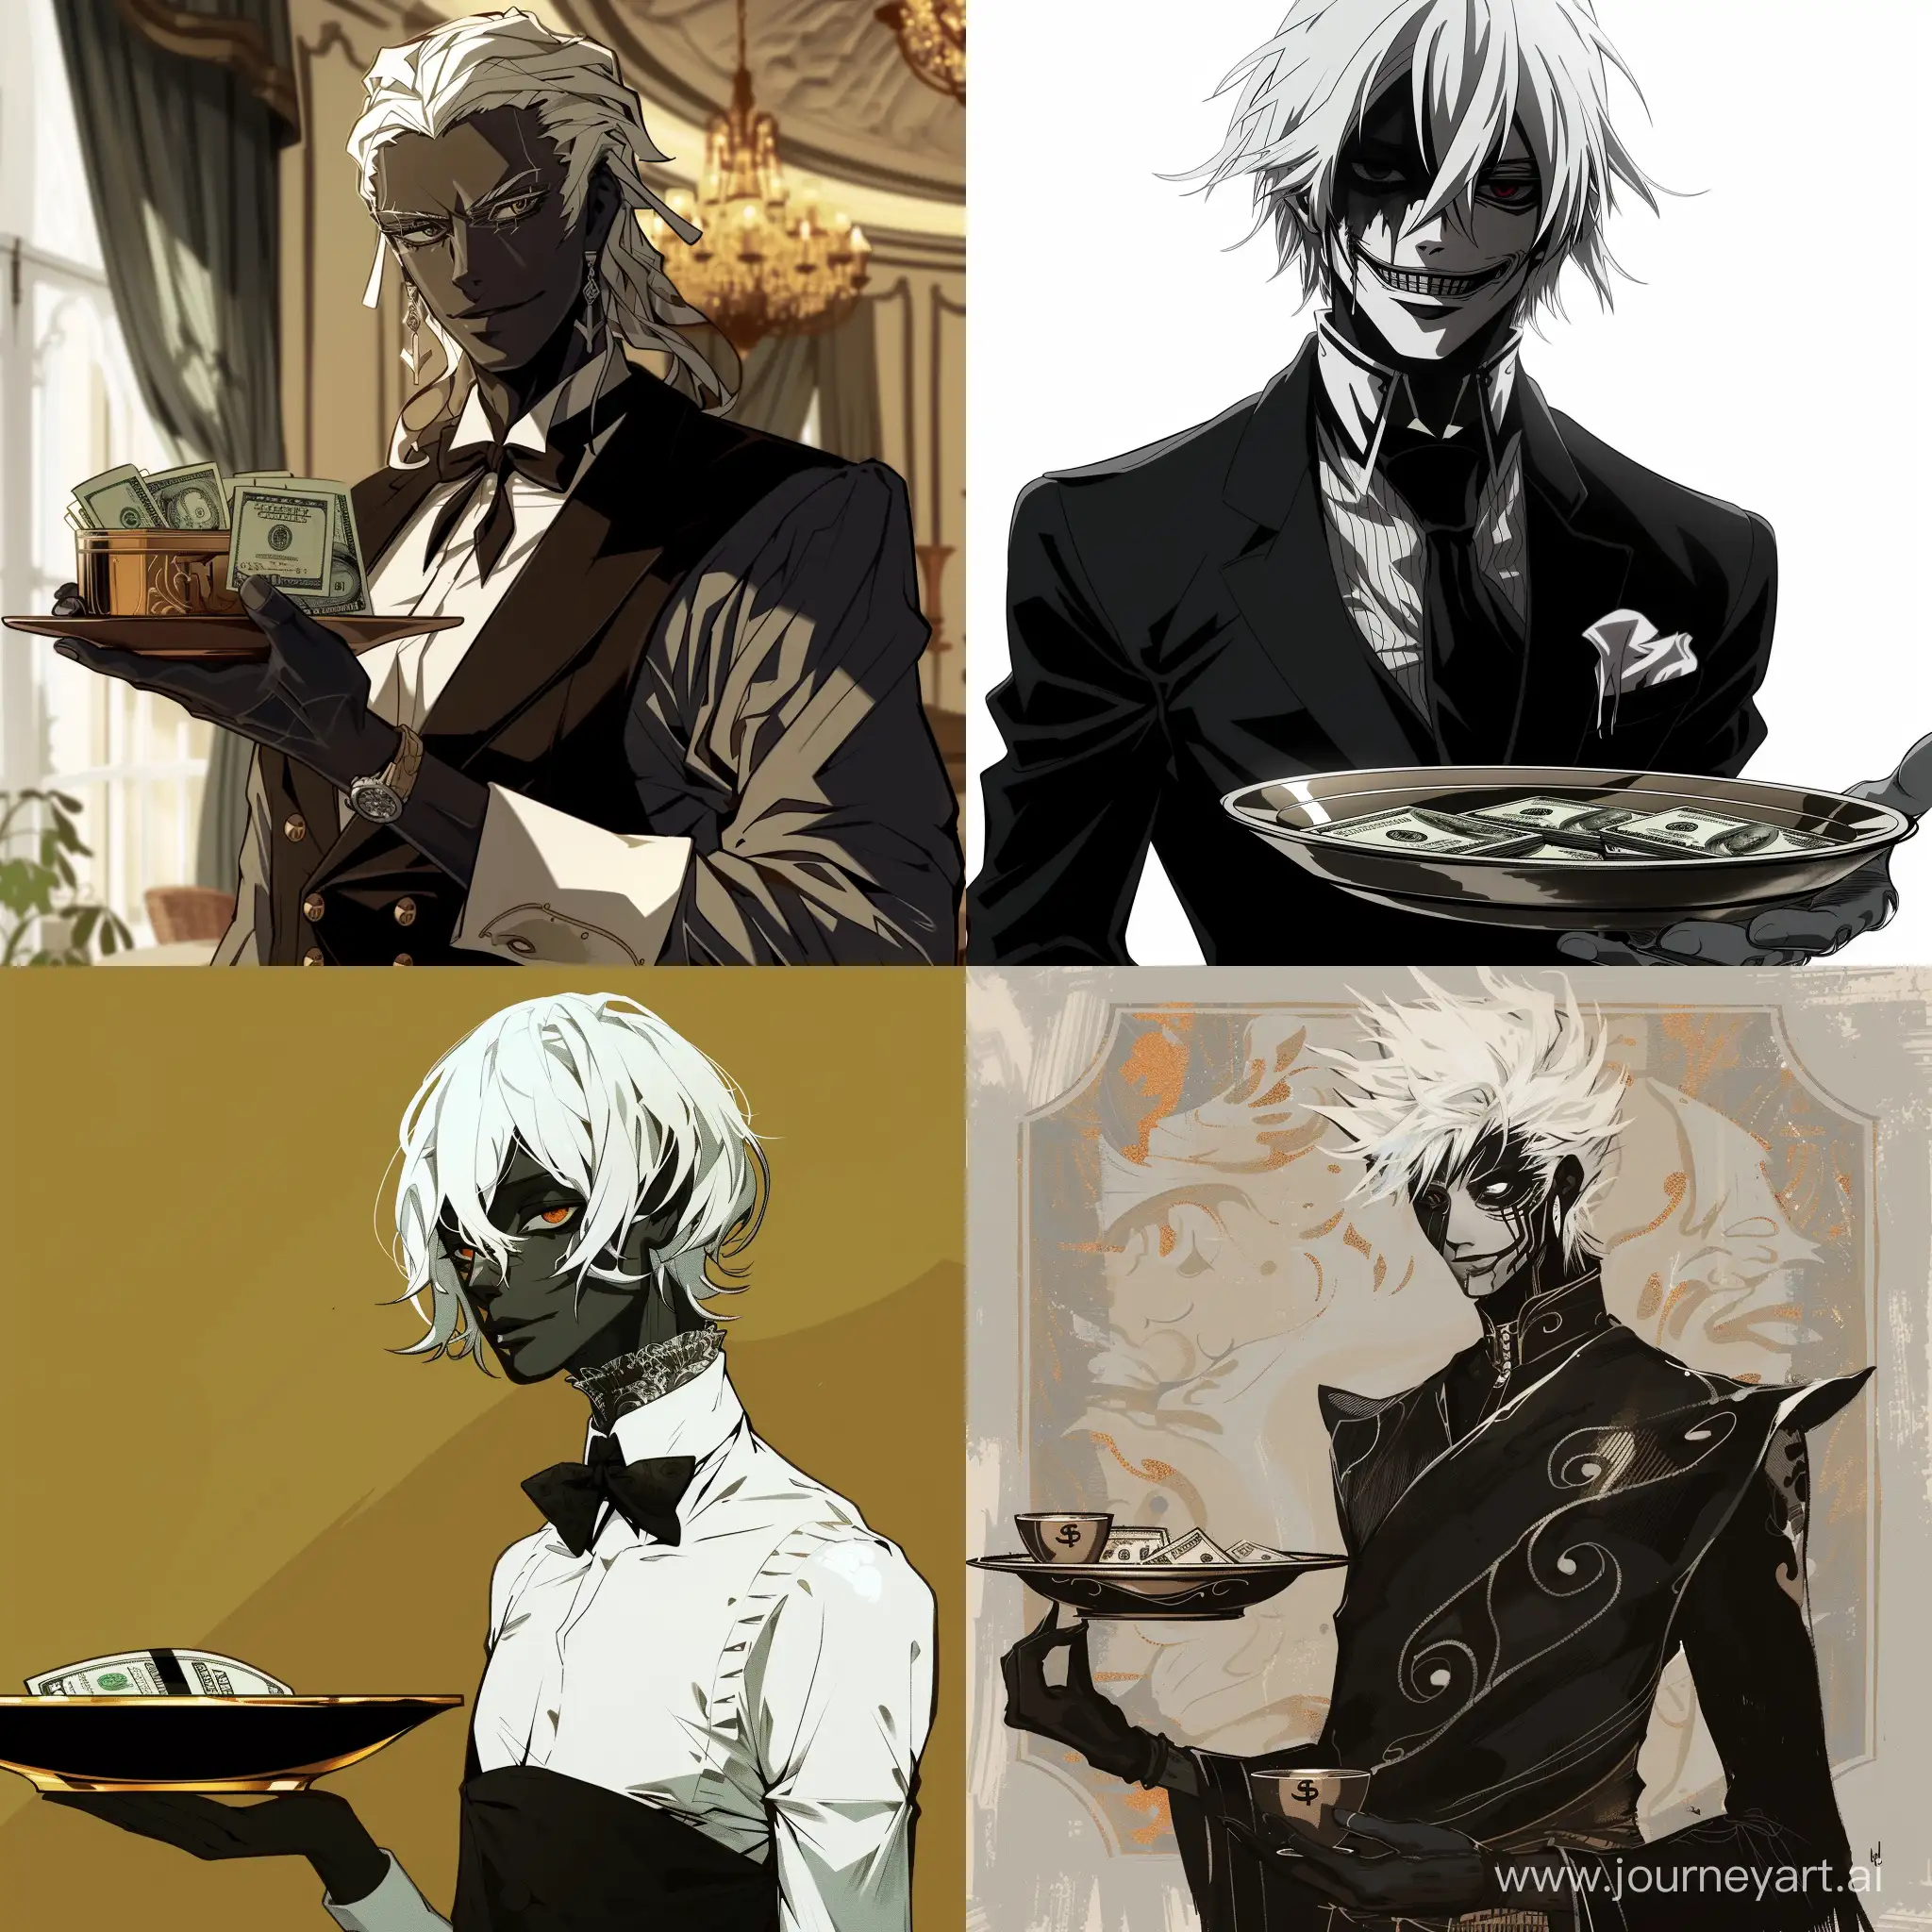 A BUTLER IN ANIME STYLE LIKE KILL LA KILL , HE HAS WHITE HAIR AND BLACK SKIN, HE IS HOLDING A SERVING TRAY OF MONEY.